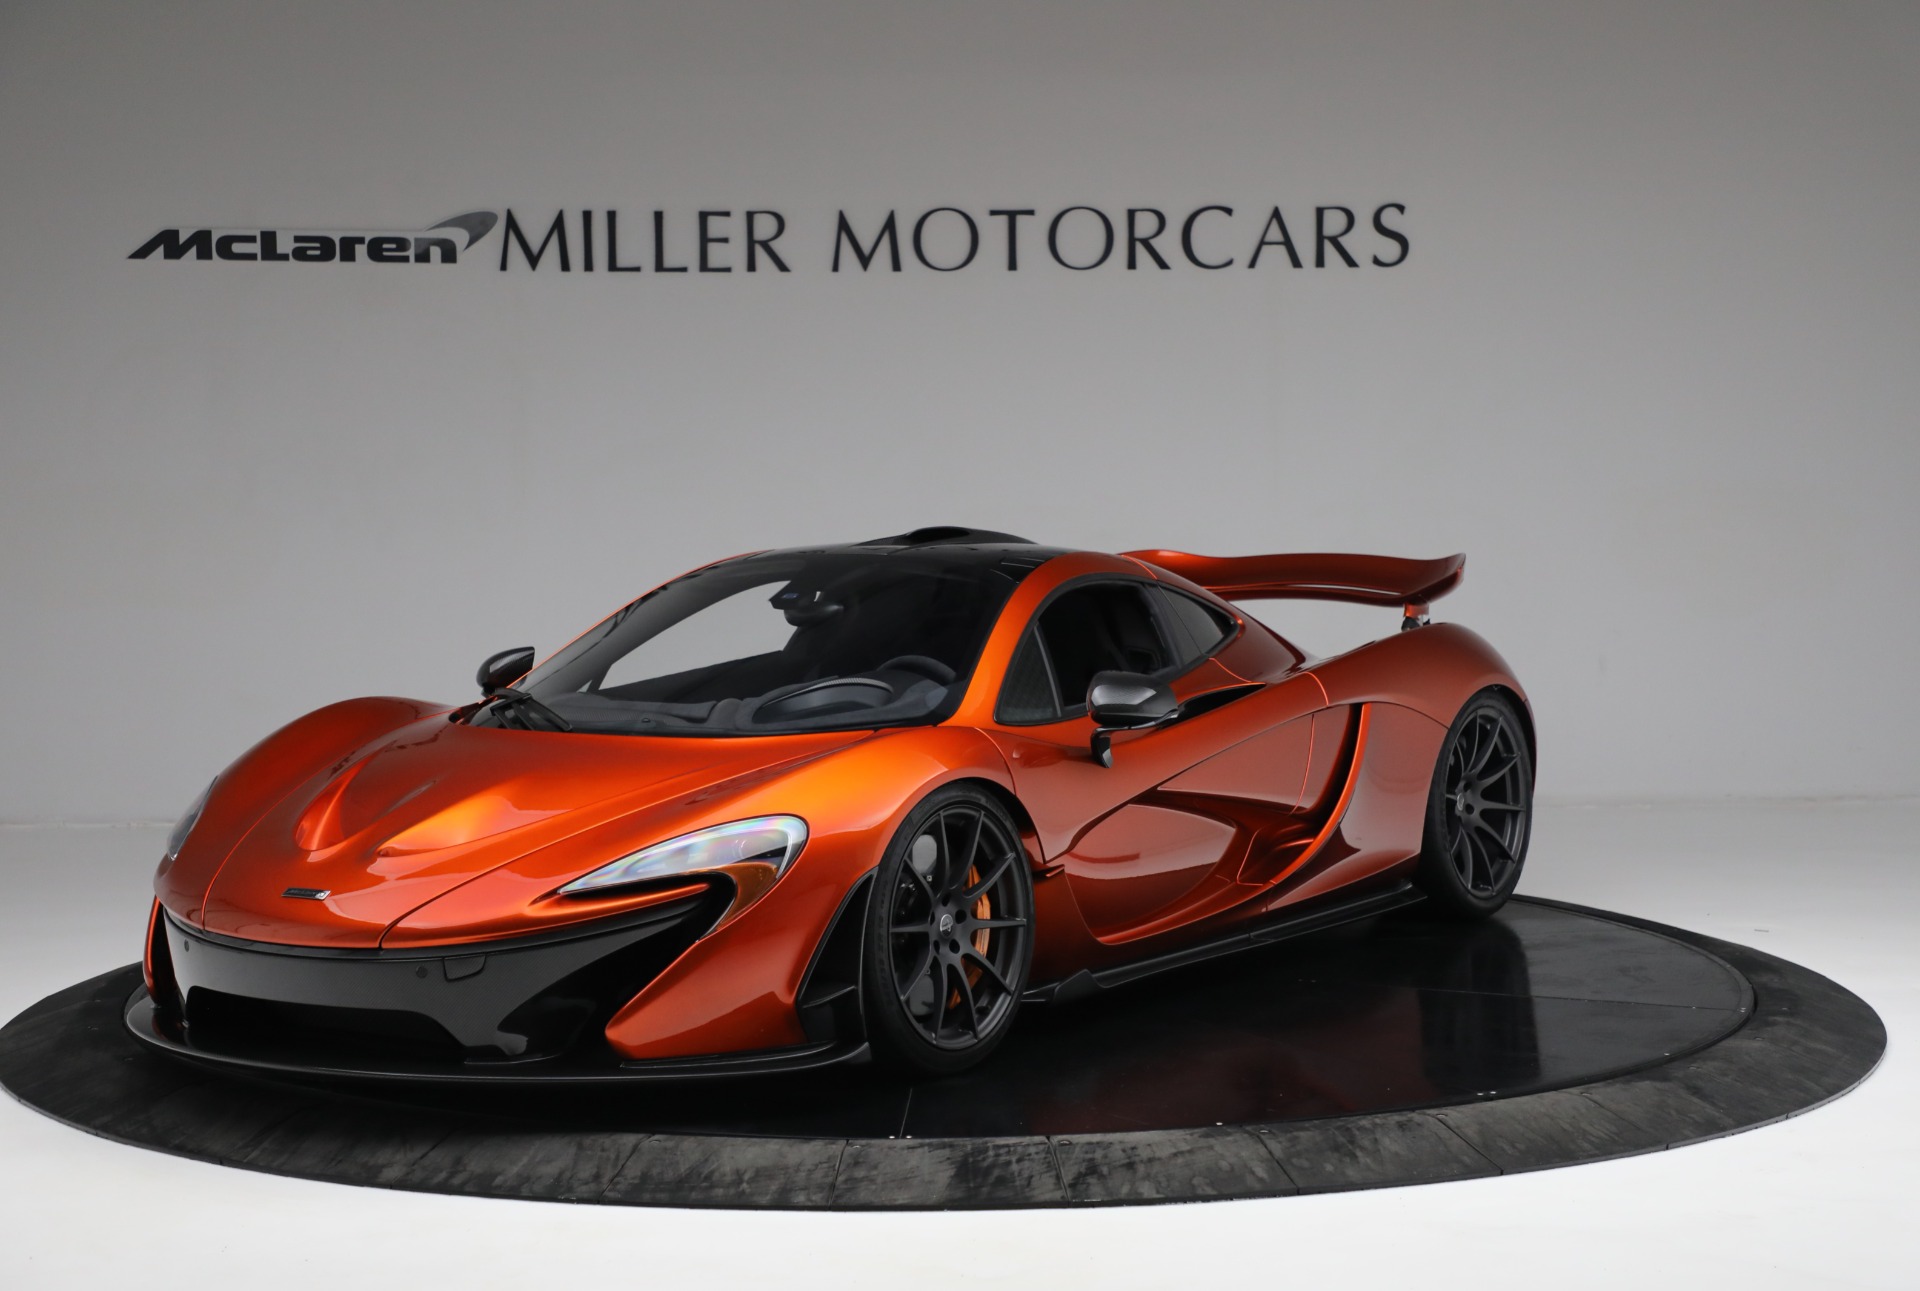 Used 2015 McLaren P1 for sale $2,295,000 at Pagani of Greenwich in Greenwich CT 06830 1